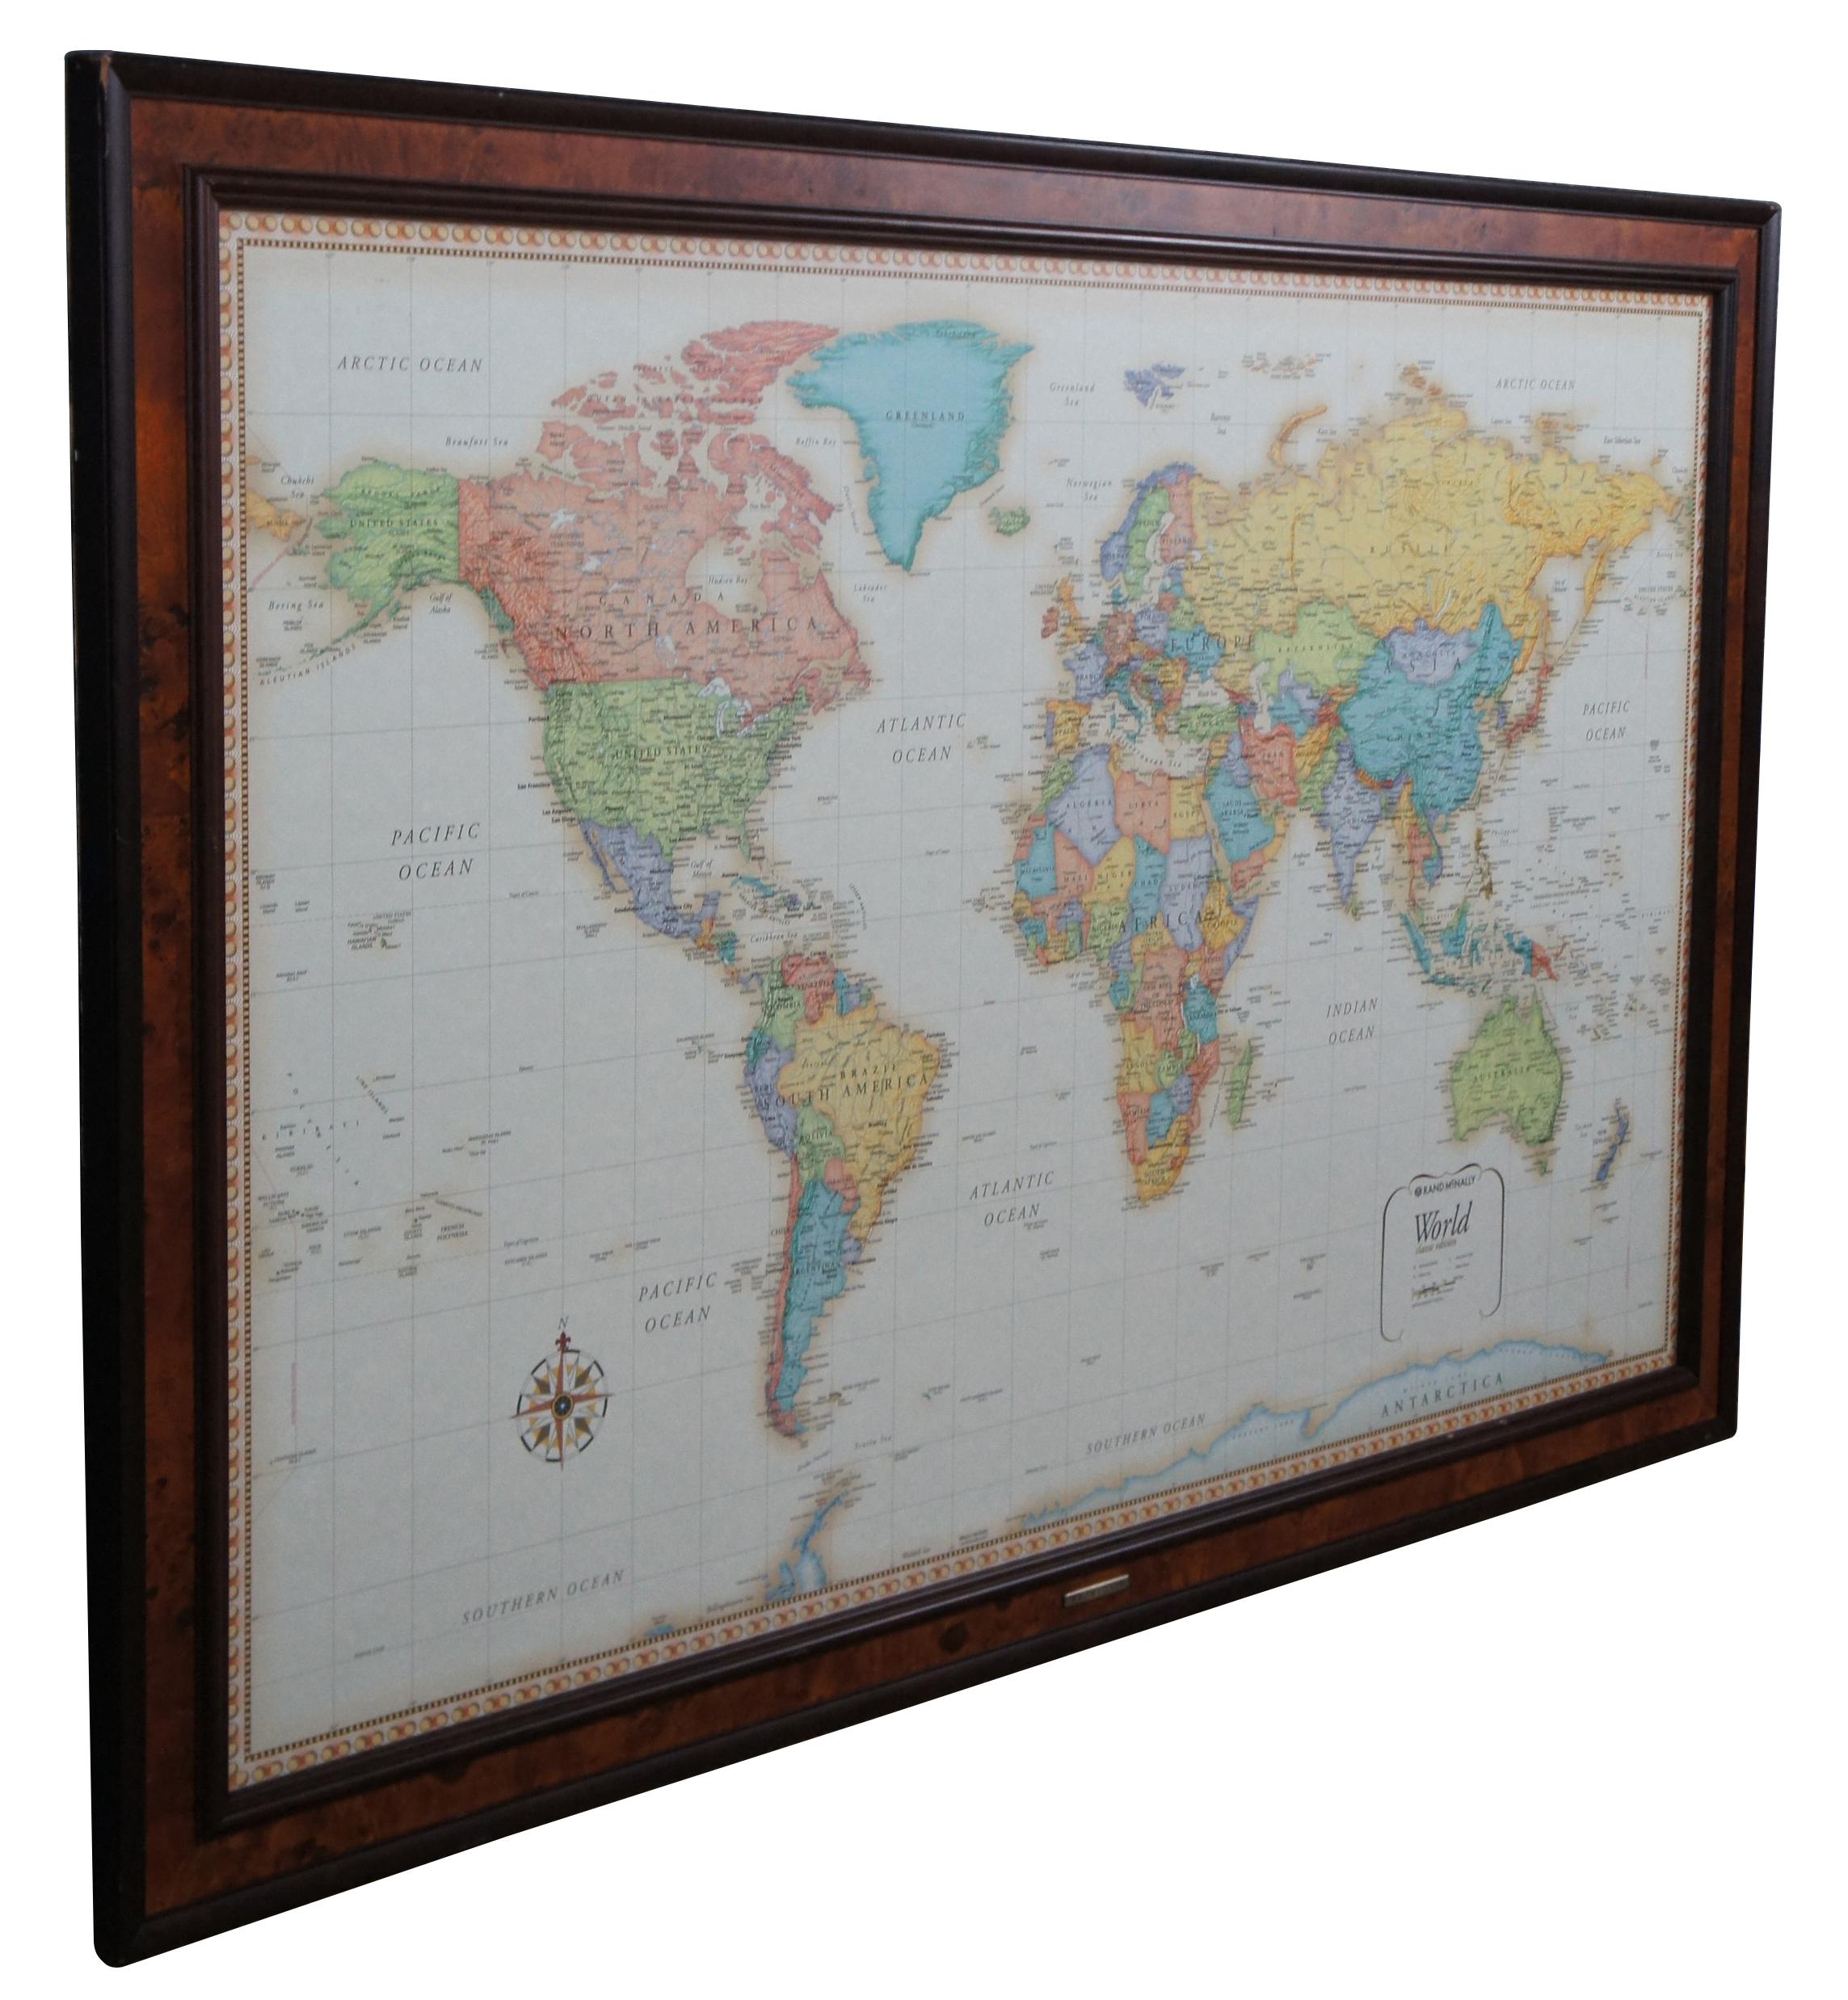 Frontgate Magnetic Travel Map by Rand McNally. Allows you to chart your journeys around the globe and even plan that “someday” trip of a lifetime. Printed on parchment-style paper with rich, subdued colors that give each one a sophisticated